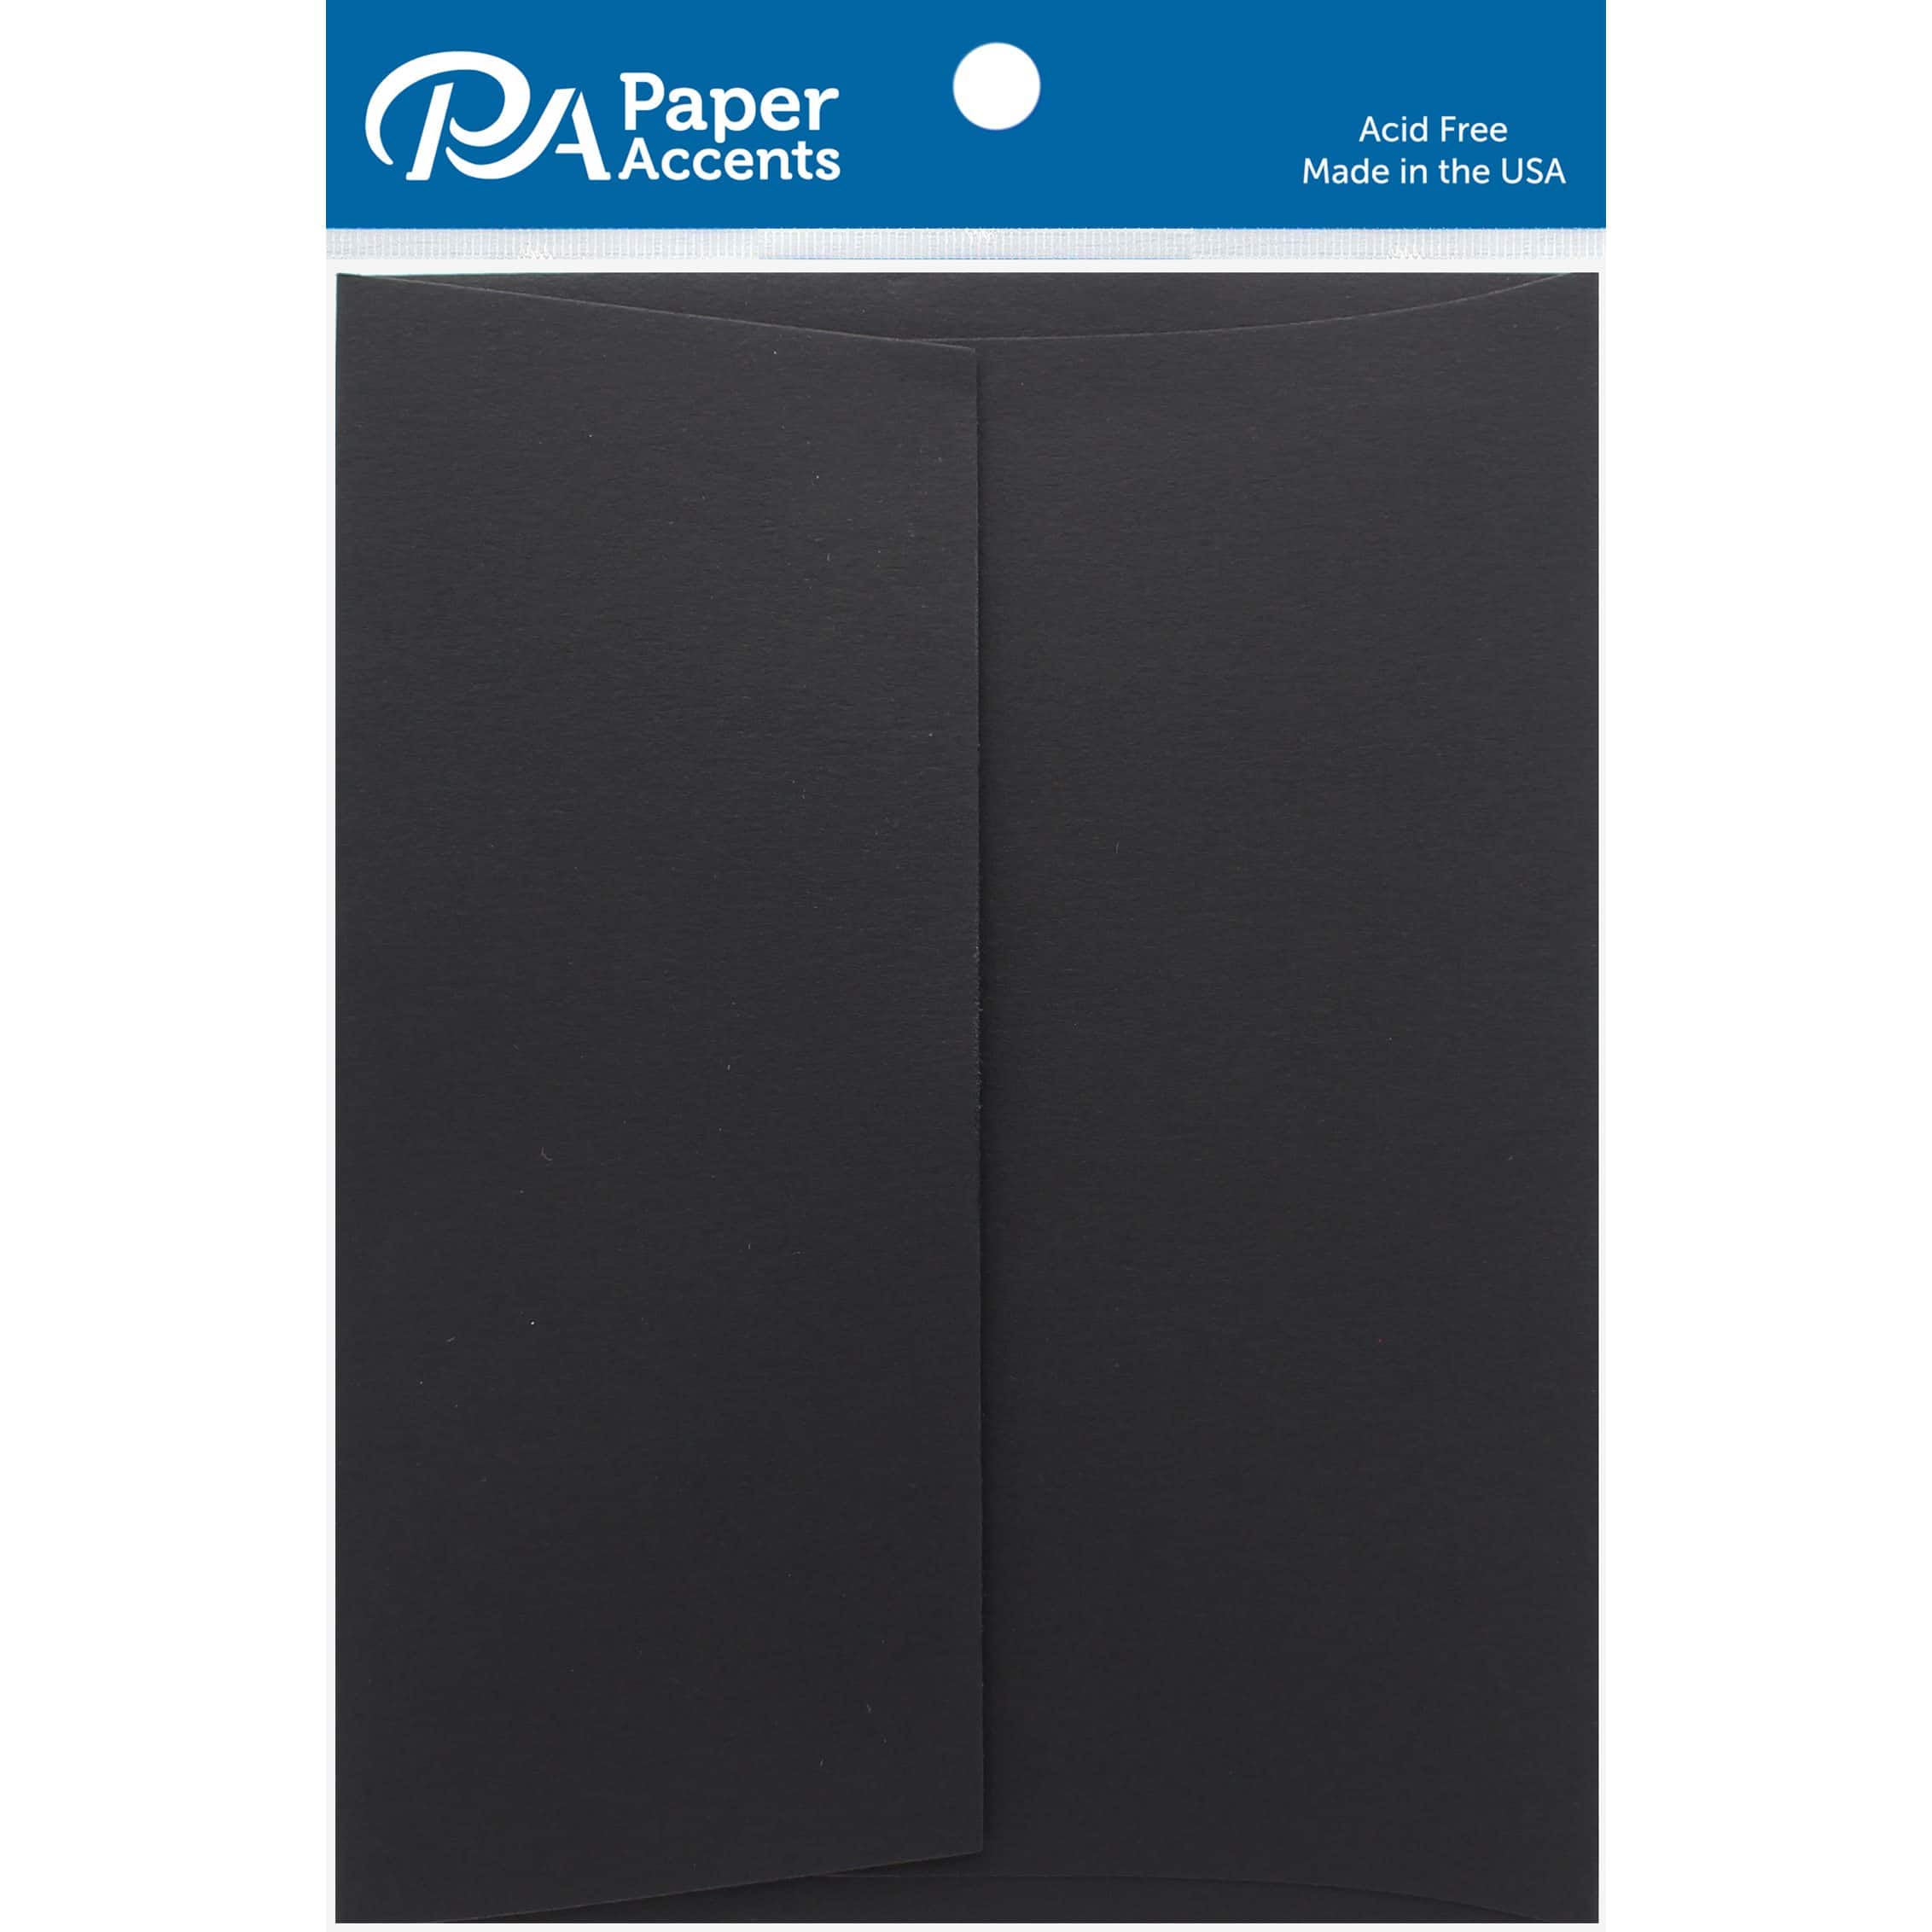 PA Paper™ Accents 4.25" x 5.5" Heavyweight Envelopes, 25ct.